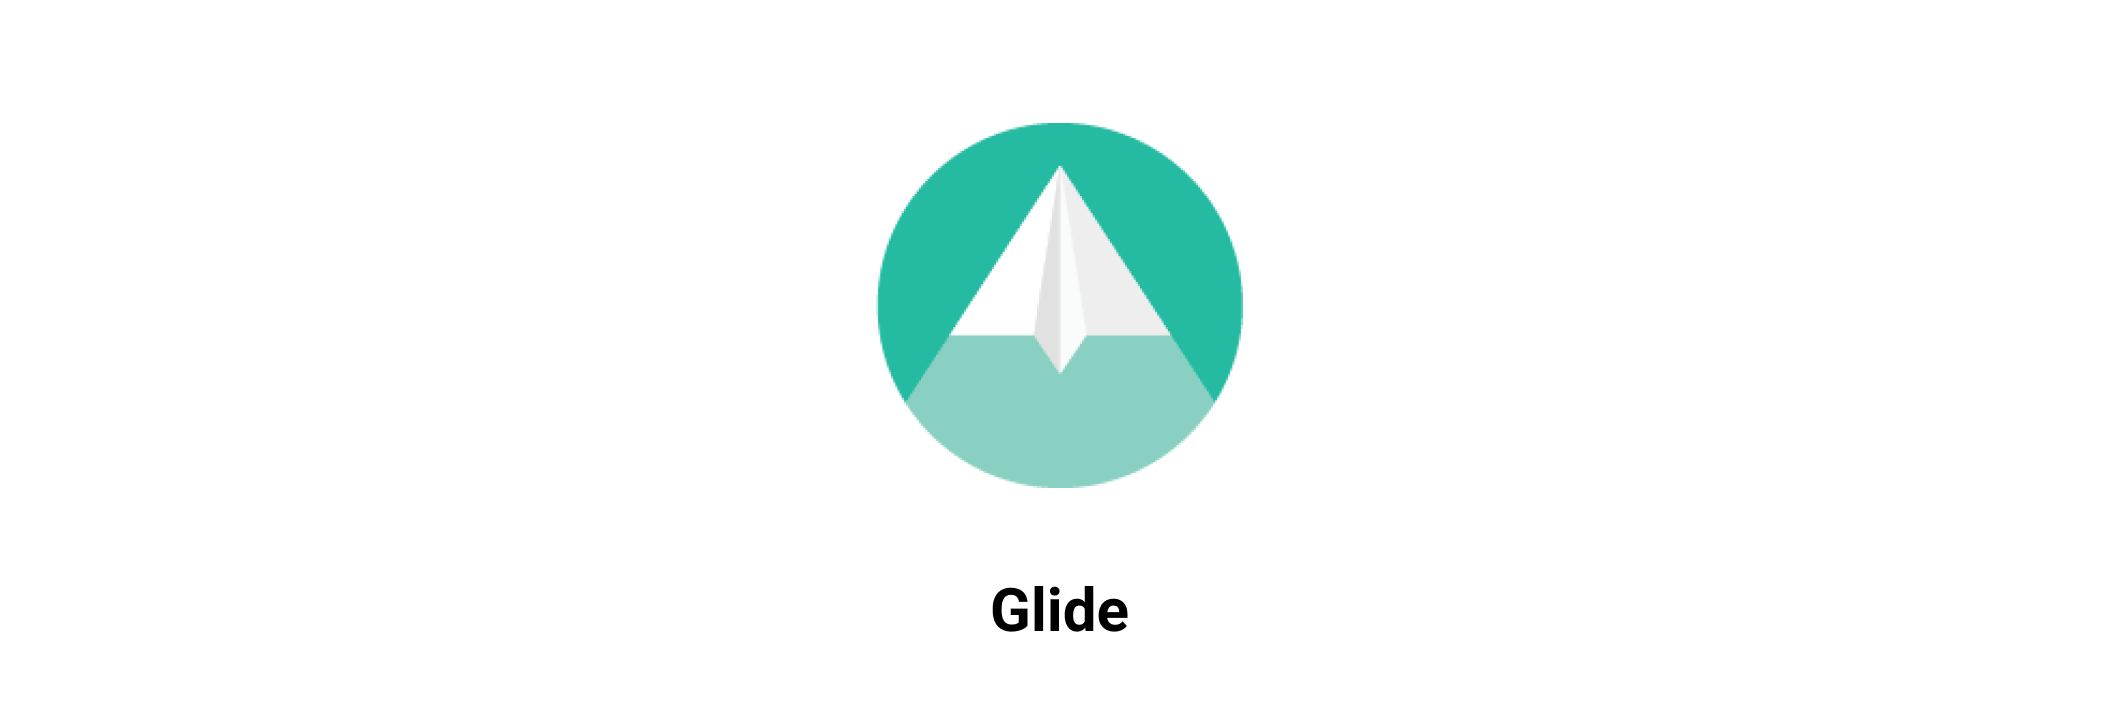 Best Android Development Tools glide